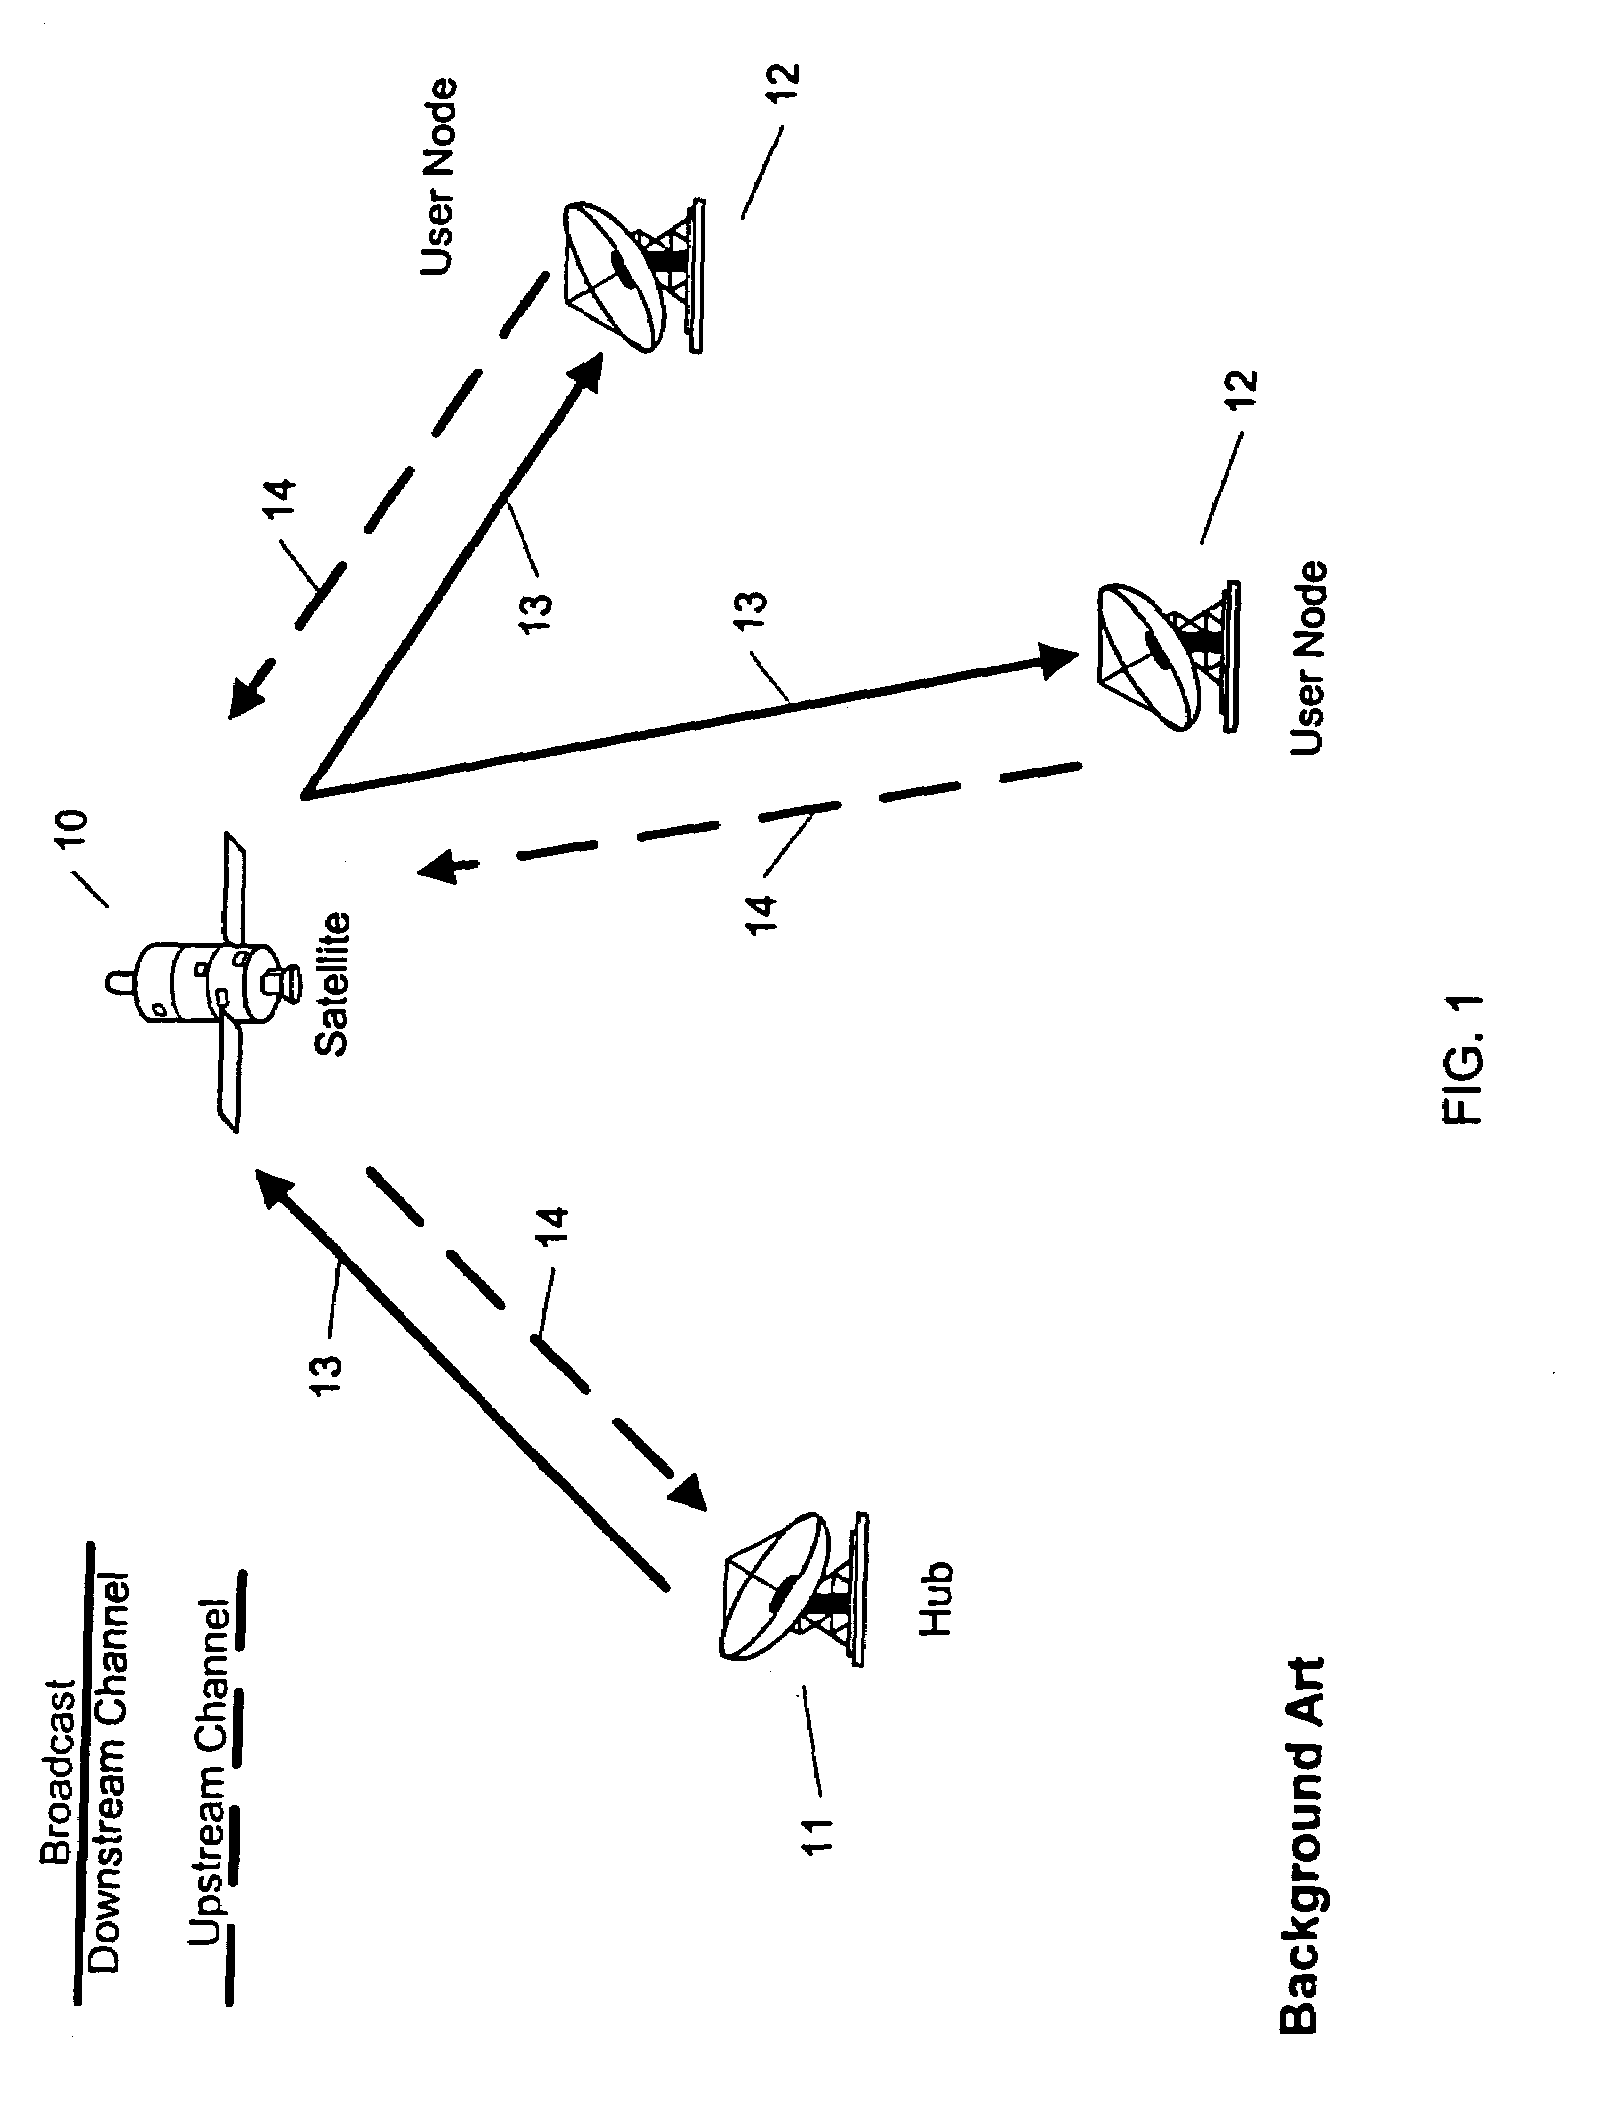 Method, apparatus, and system for using a synchronous burst time plan in a communication network